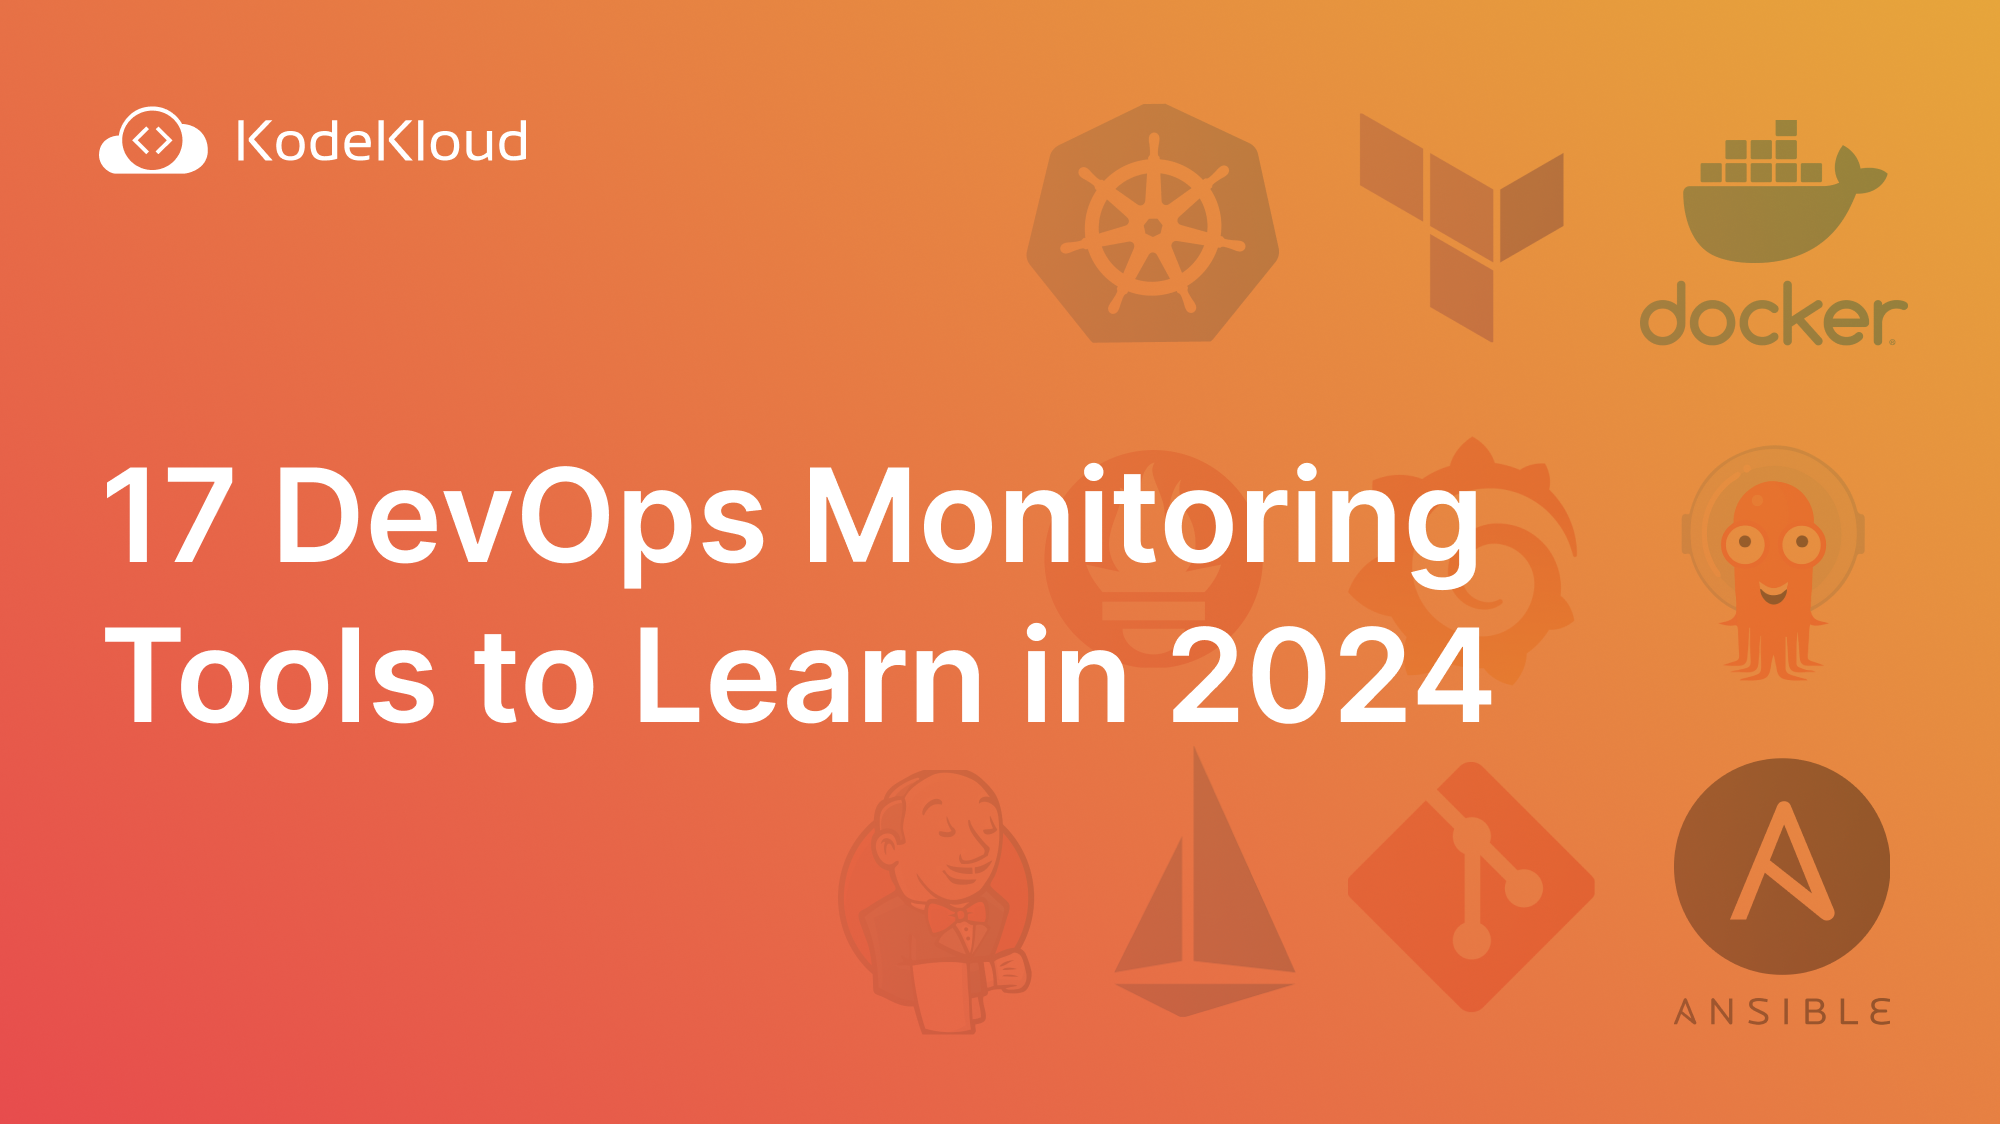 17 DevOps Monitoring Tools to Learn in 2024